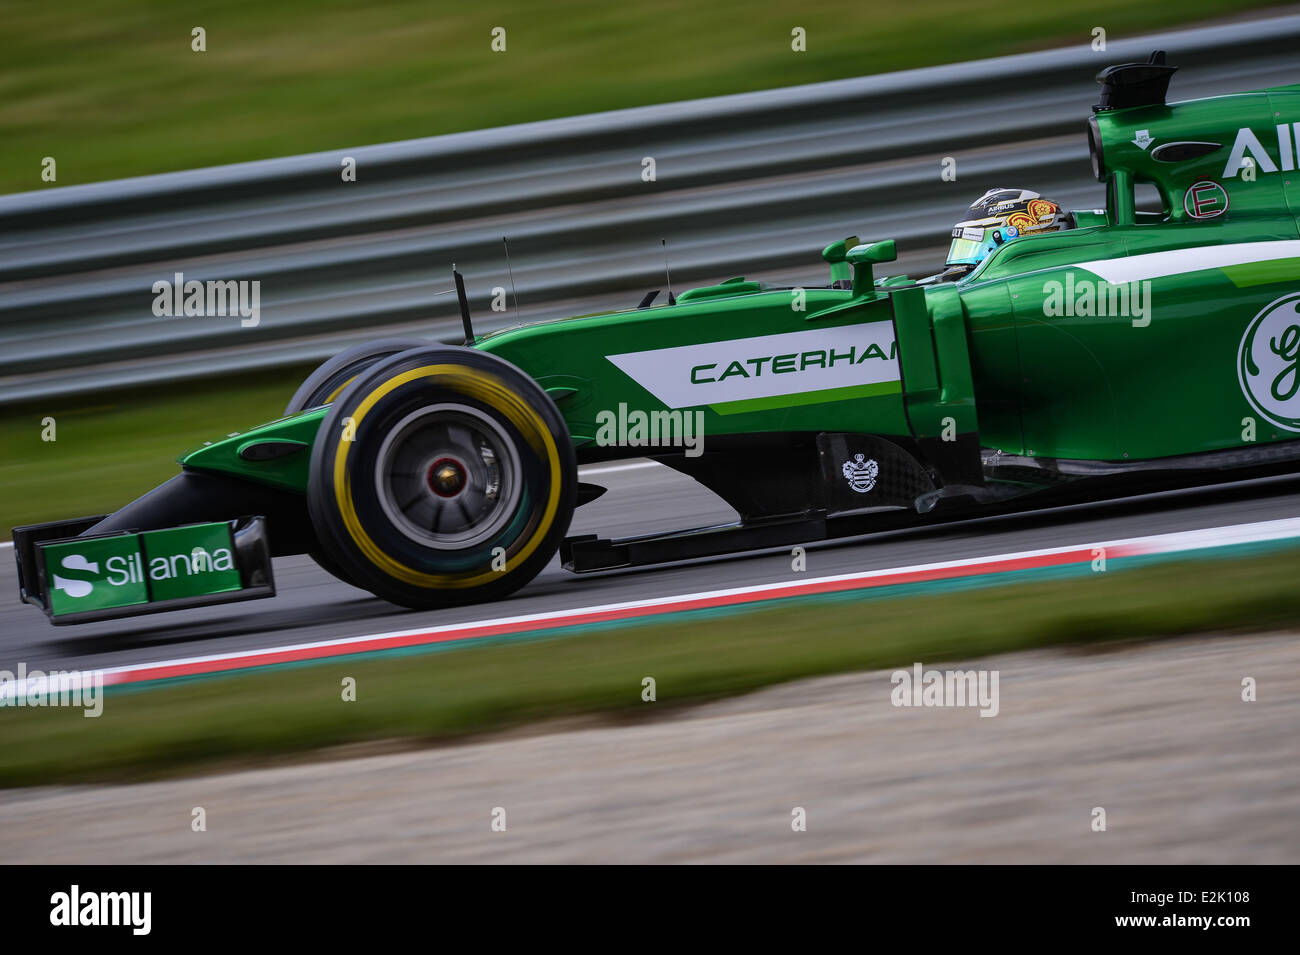 Spielberg, Austria. 20th June, 2014. Japanese Formula One driver Kamui Kobayashi of Caterham steers his car during the second practice session at the Red Bull Ring race track in Spielberg, Austria, 20 June 2014. The 2014 Formula One Grand Prix of Austria will take place on 22 June. Photo: David Ebener/dpa/Alamy Live News Stock Photo